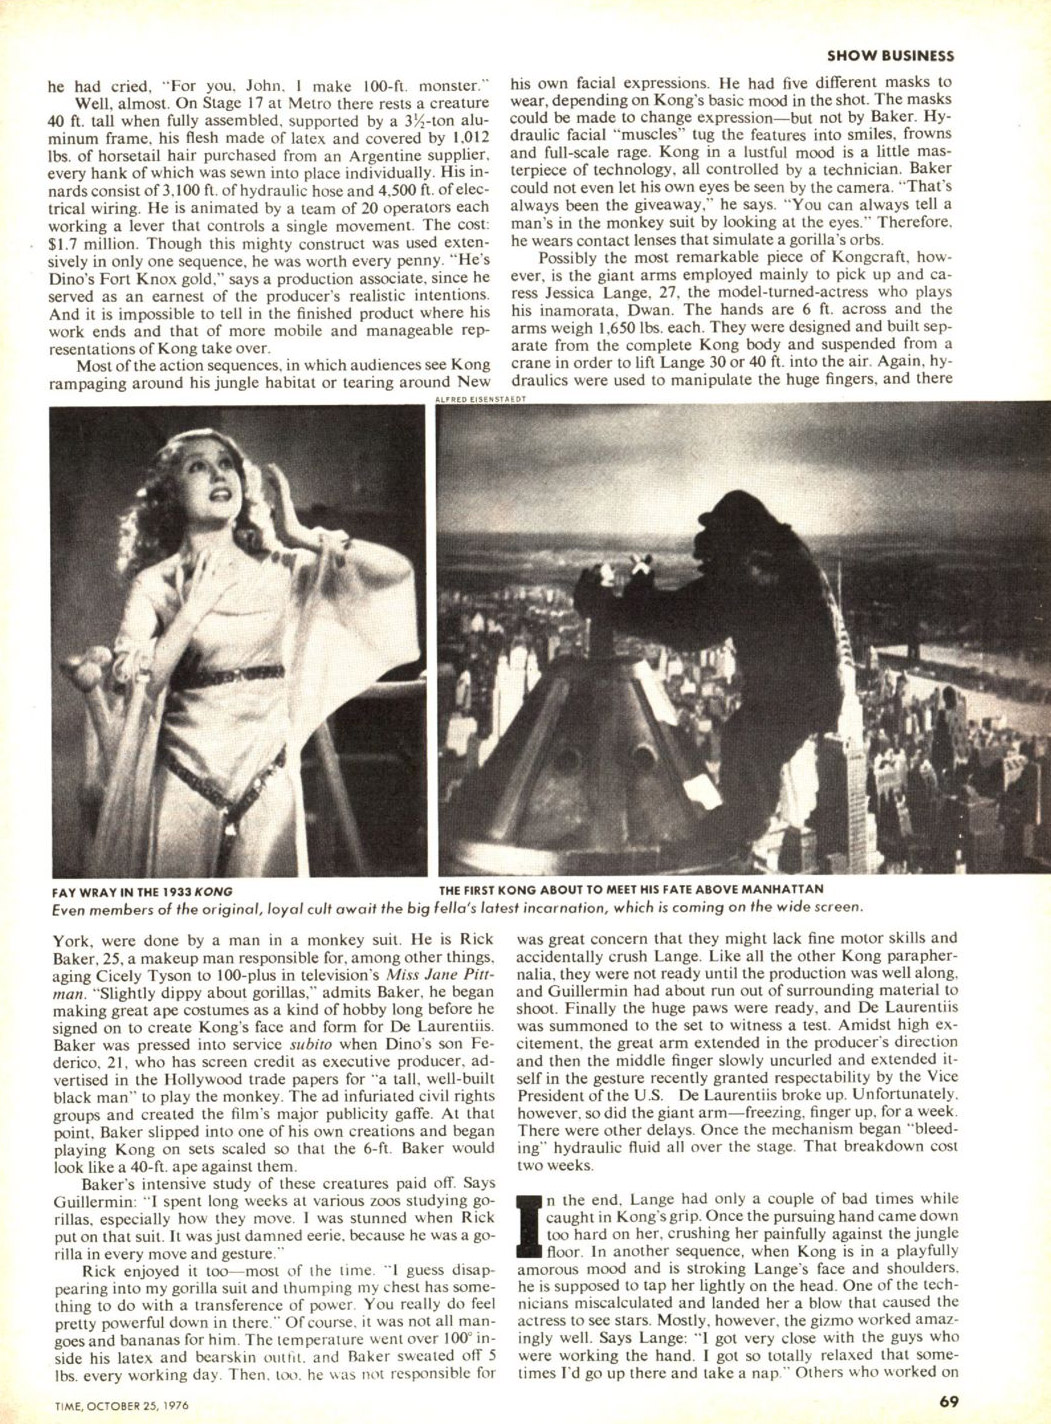 Page from the Oct. 25, 1976 feature story about King Kong, Photos by Alfred Eisensteadt from 1952.